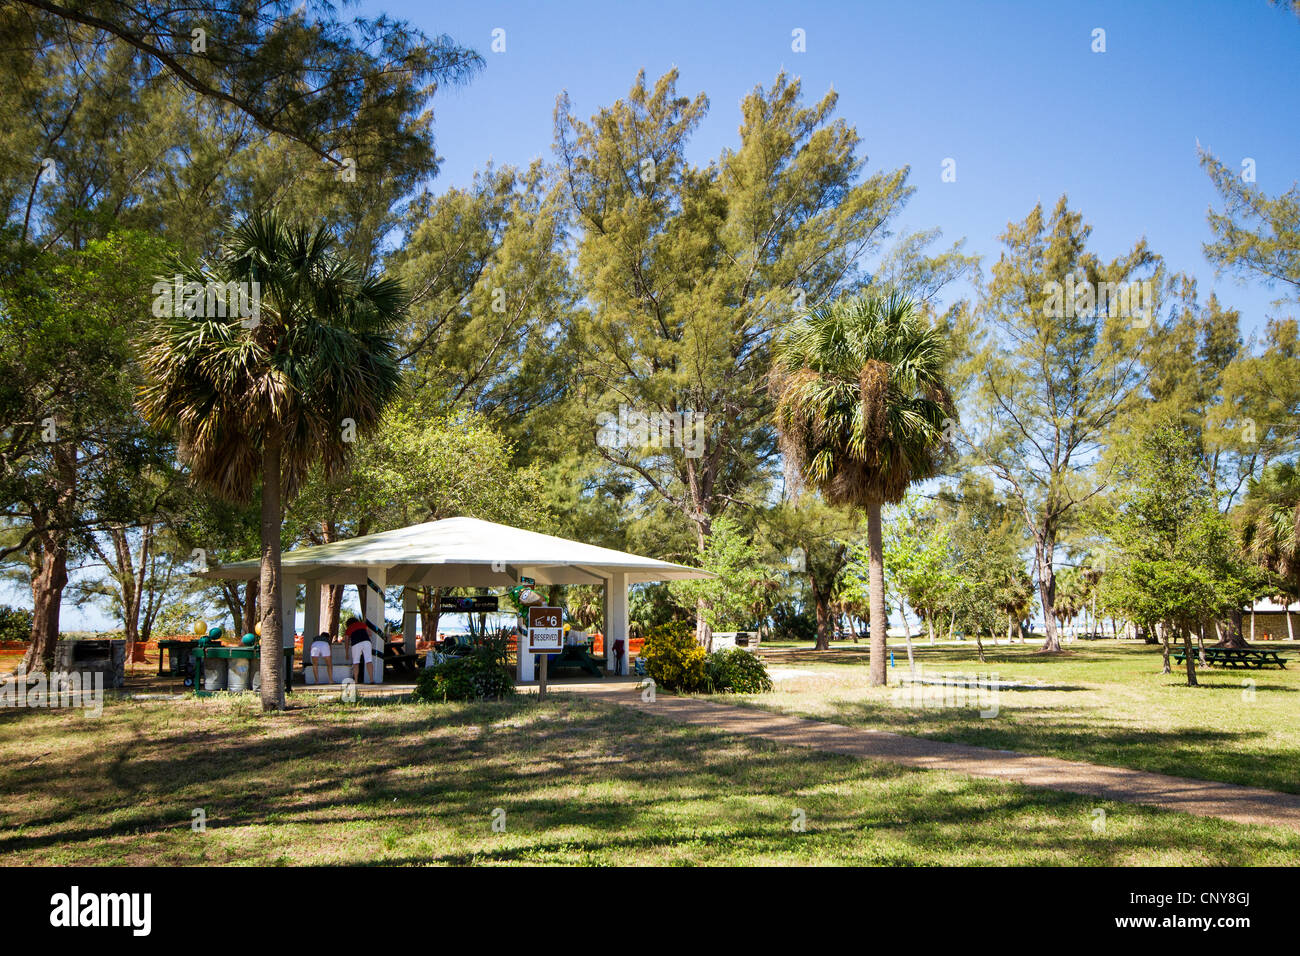 People enjoying sunny day in the picnic area at Fort De Soto Park, Florida Stock Photo